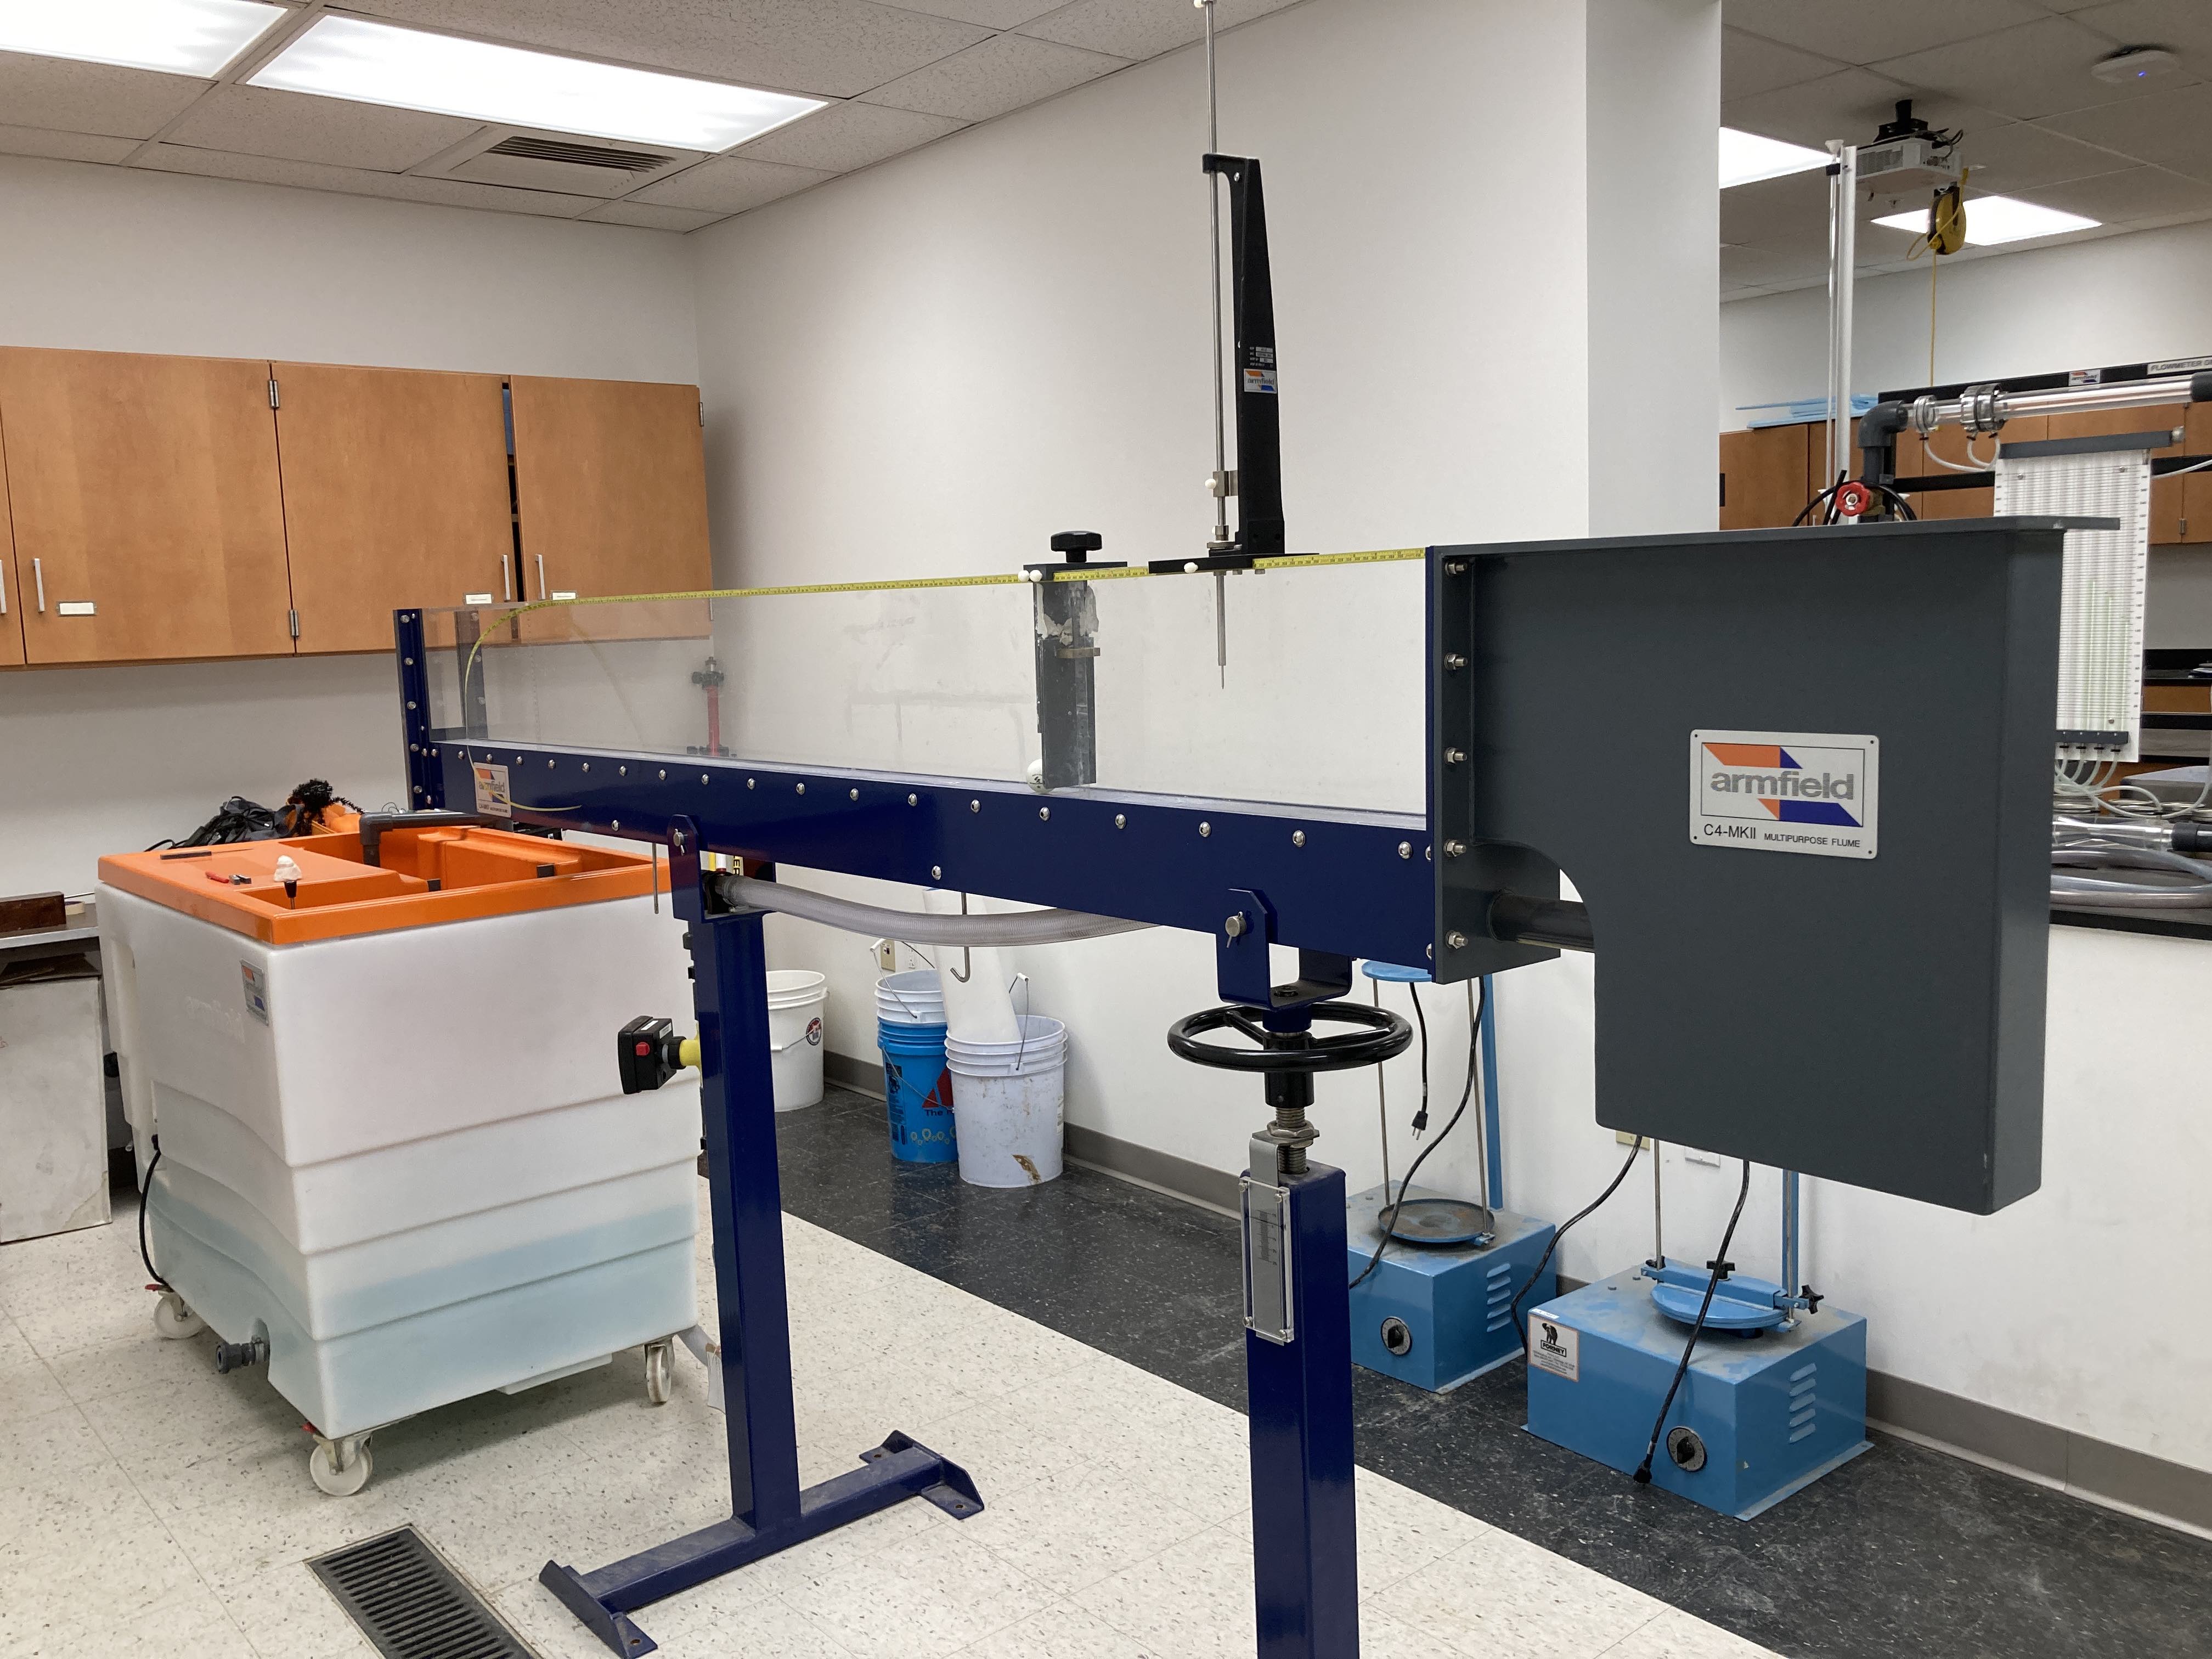 Small Adjustable-Slope Flume Stands in Lab 